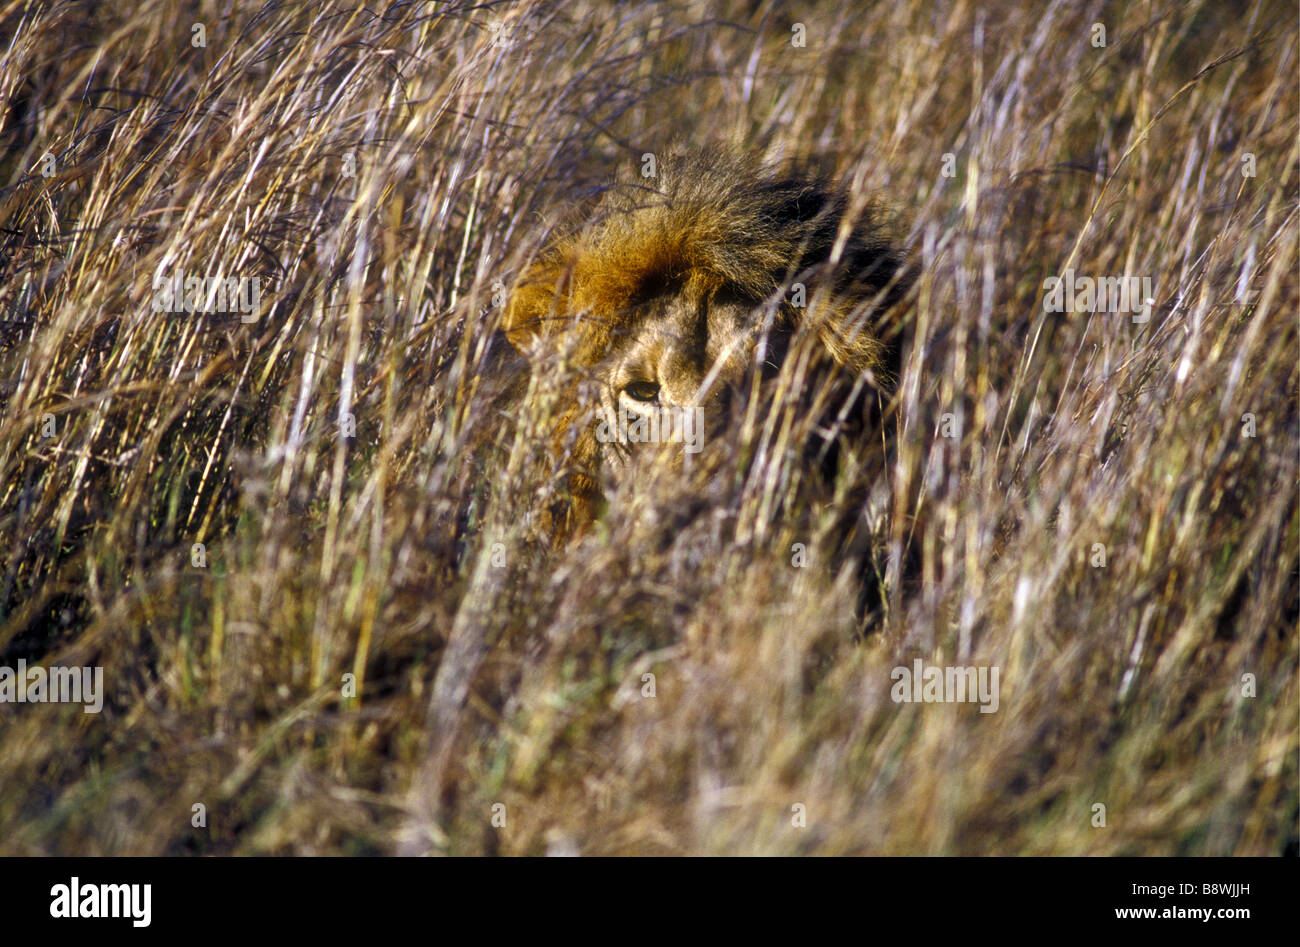 Mature male lion with full mane hiding in long grass Masai Mara National Reserve Kenya East Africa Stock Photo